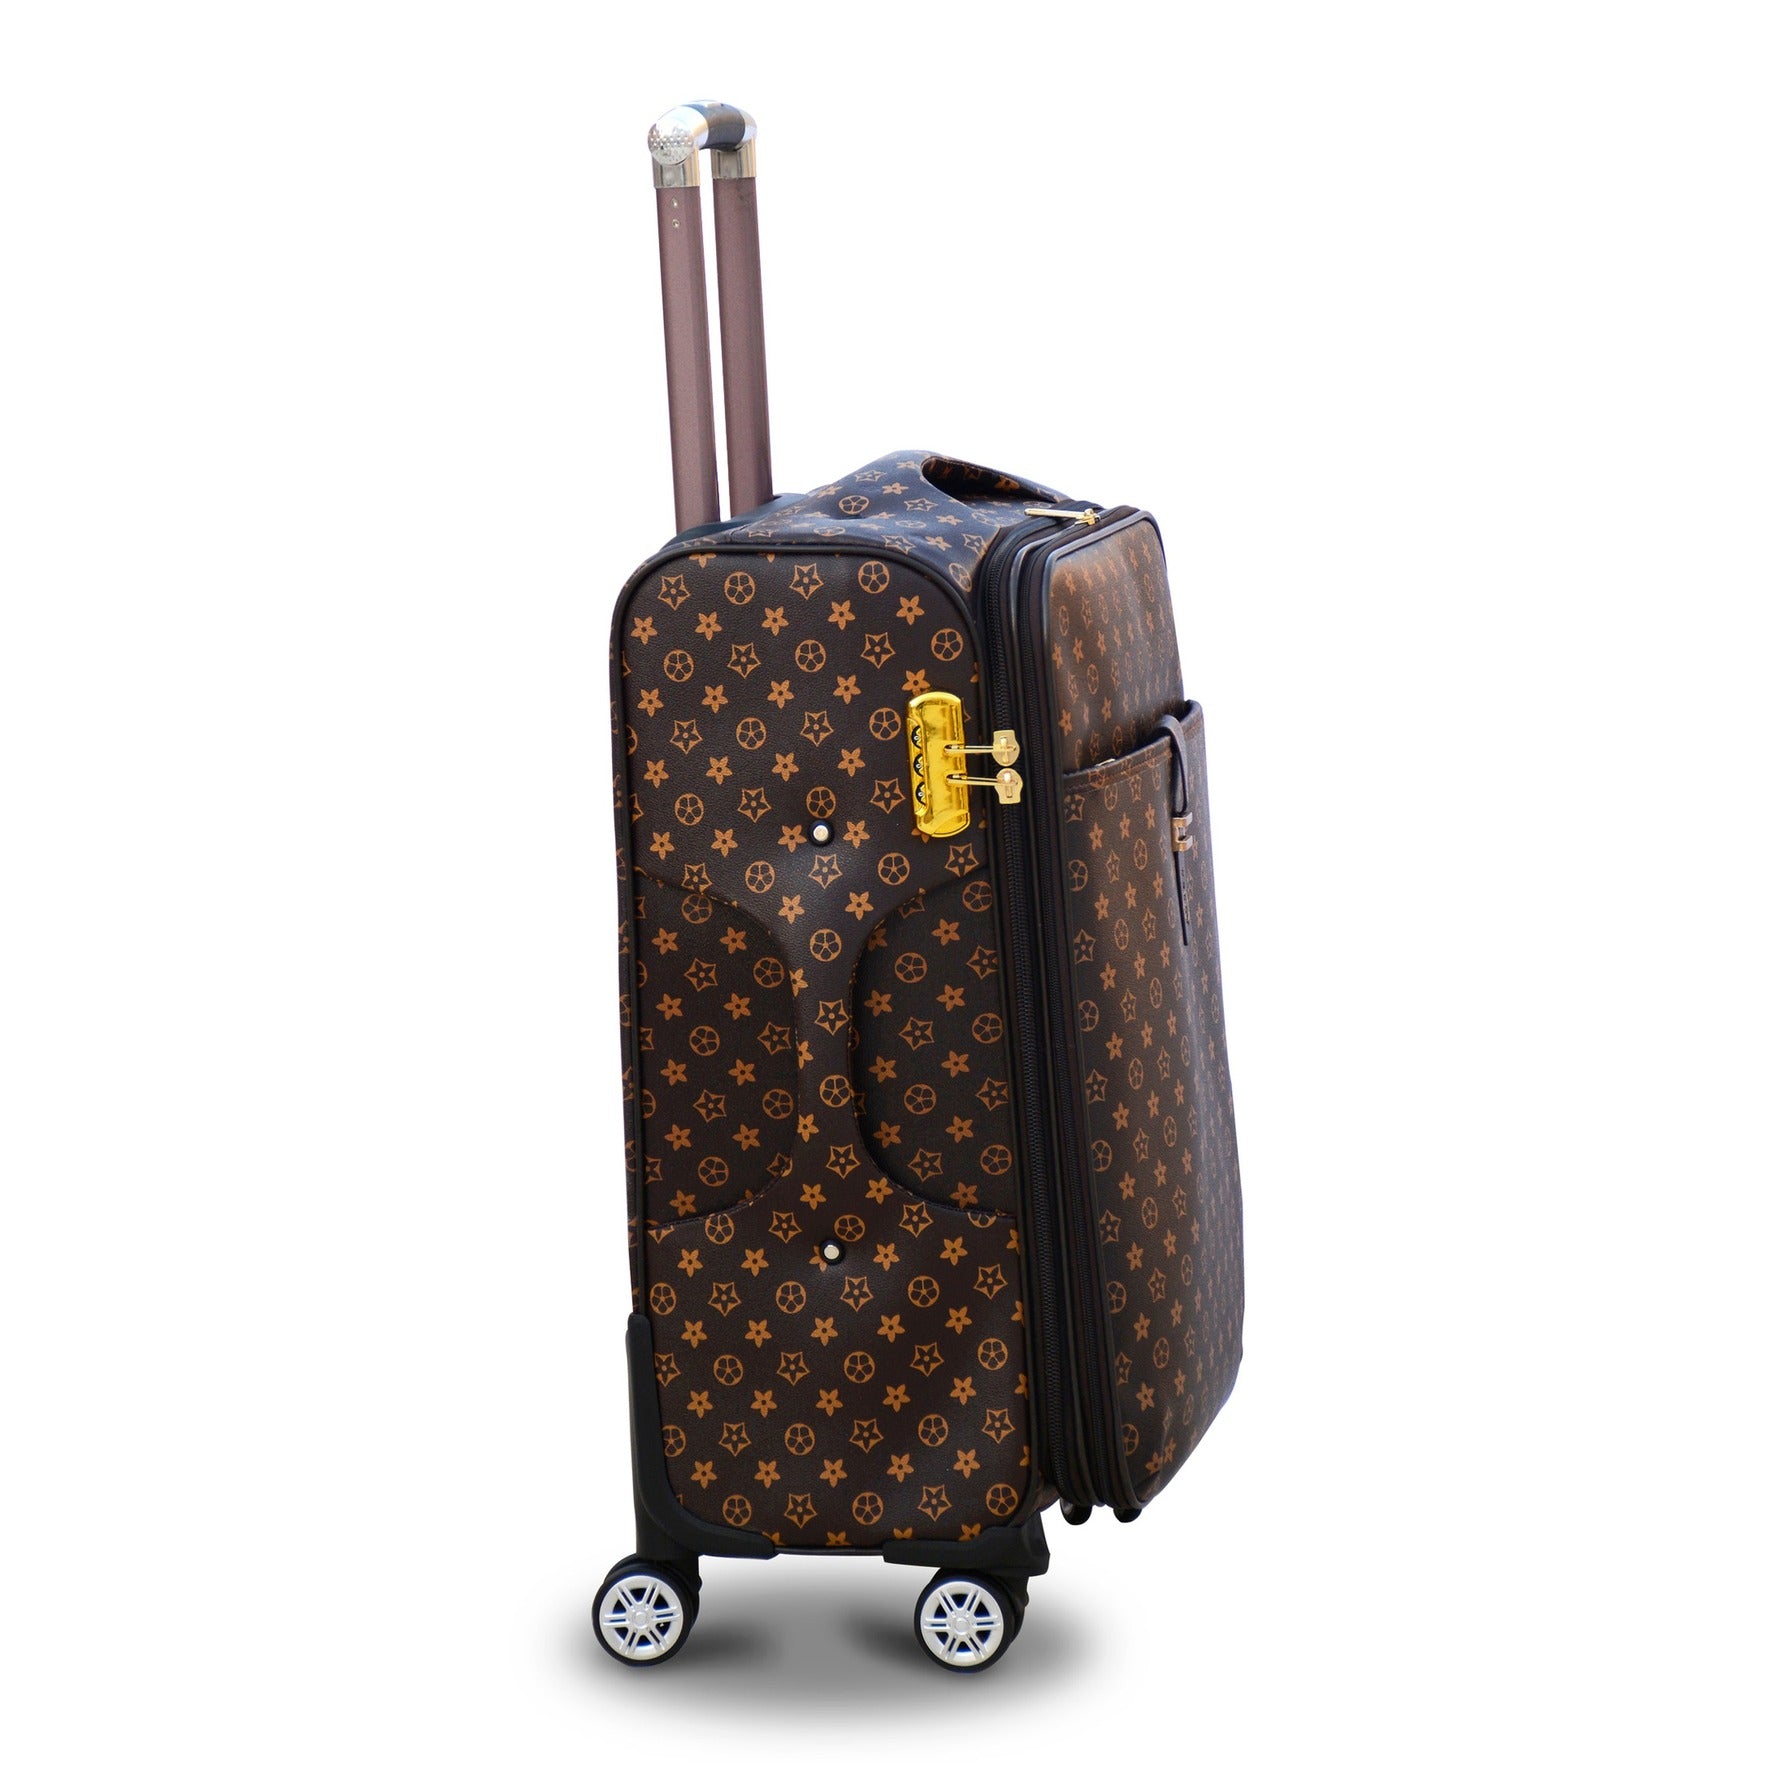 20" Brown Colour LVR PU Leather Luggage Lightweight Soft Material Carry On Trolley Bag with Spinner Wheel